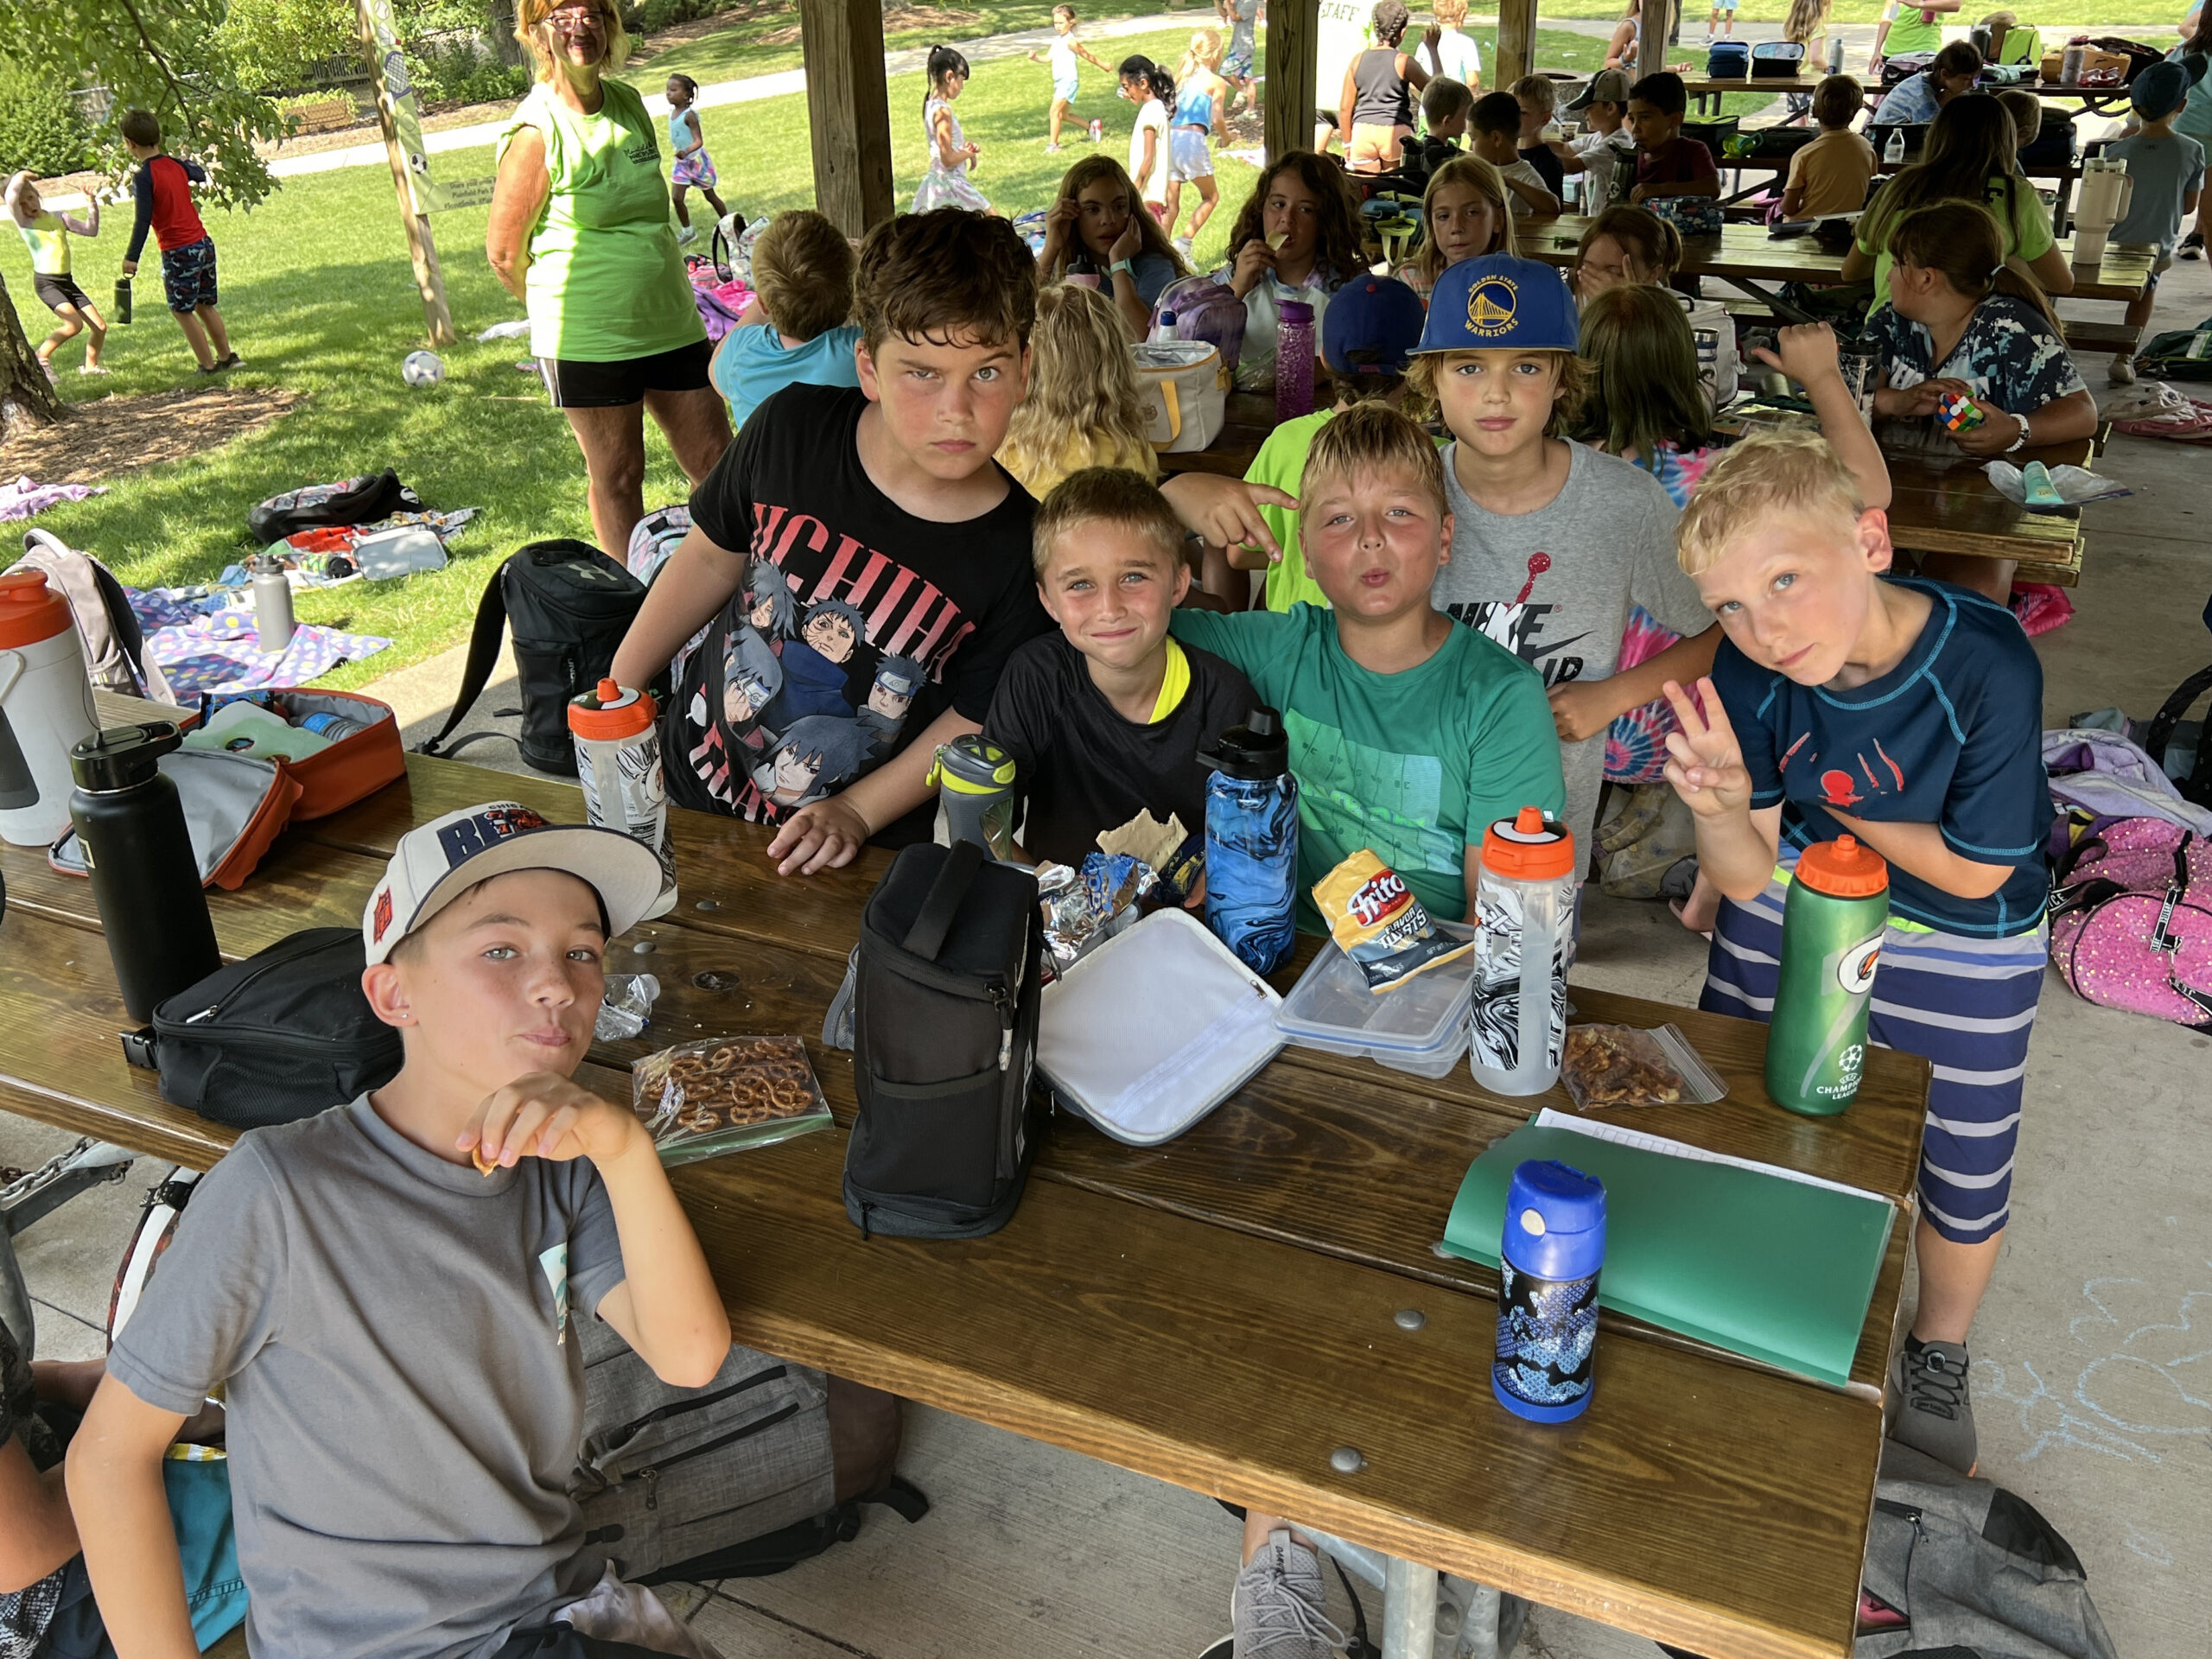 Boys at camp eating lunch at a picnic table